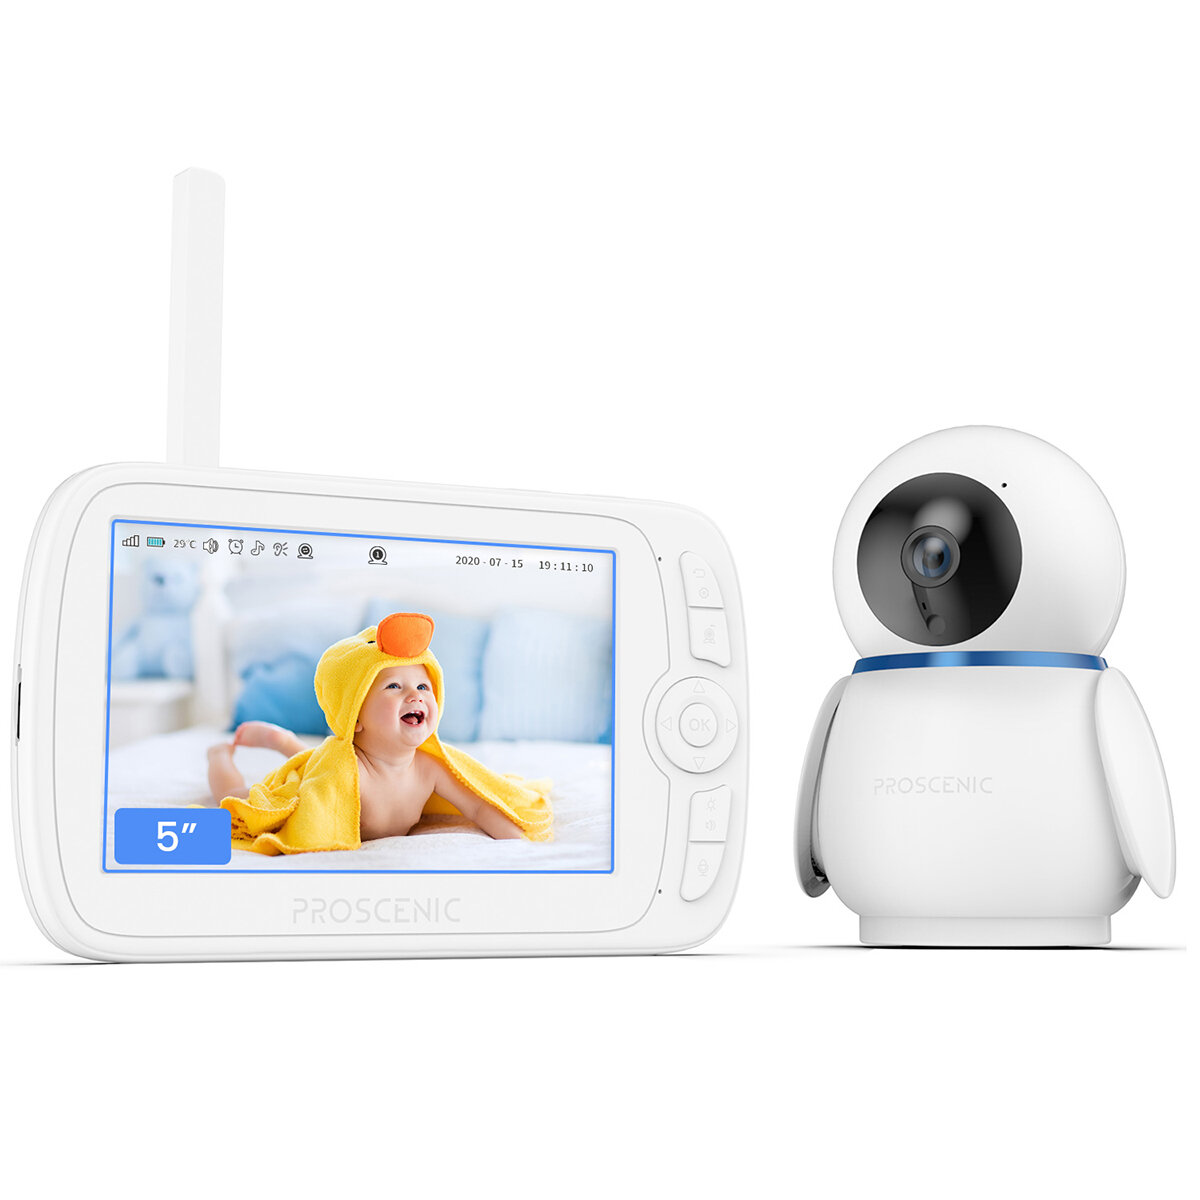 best price,proscenic,bm300,5inch,baby,video,monitor,eu,coupon,price,discount